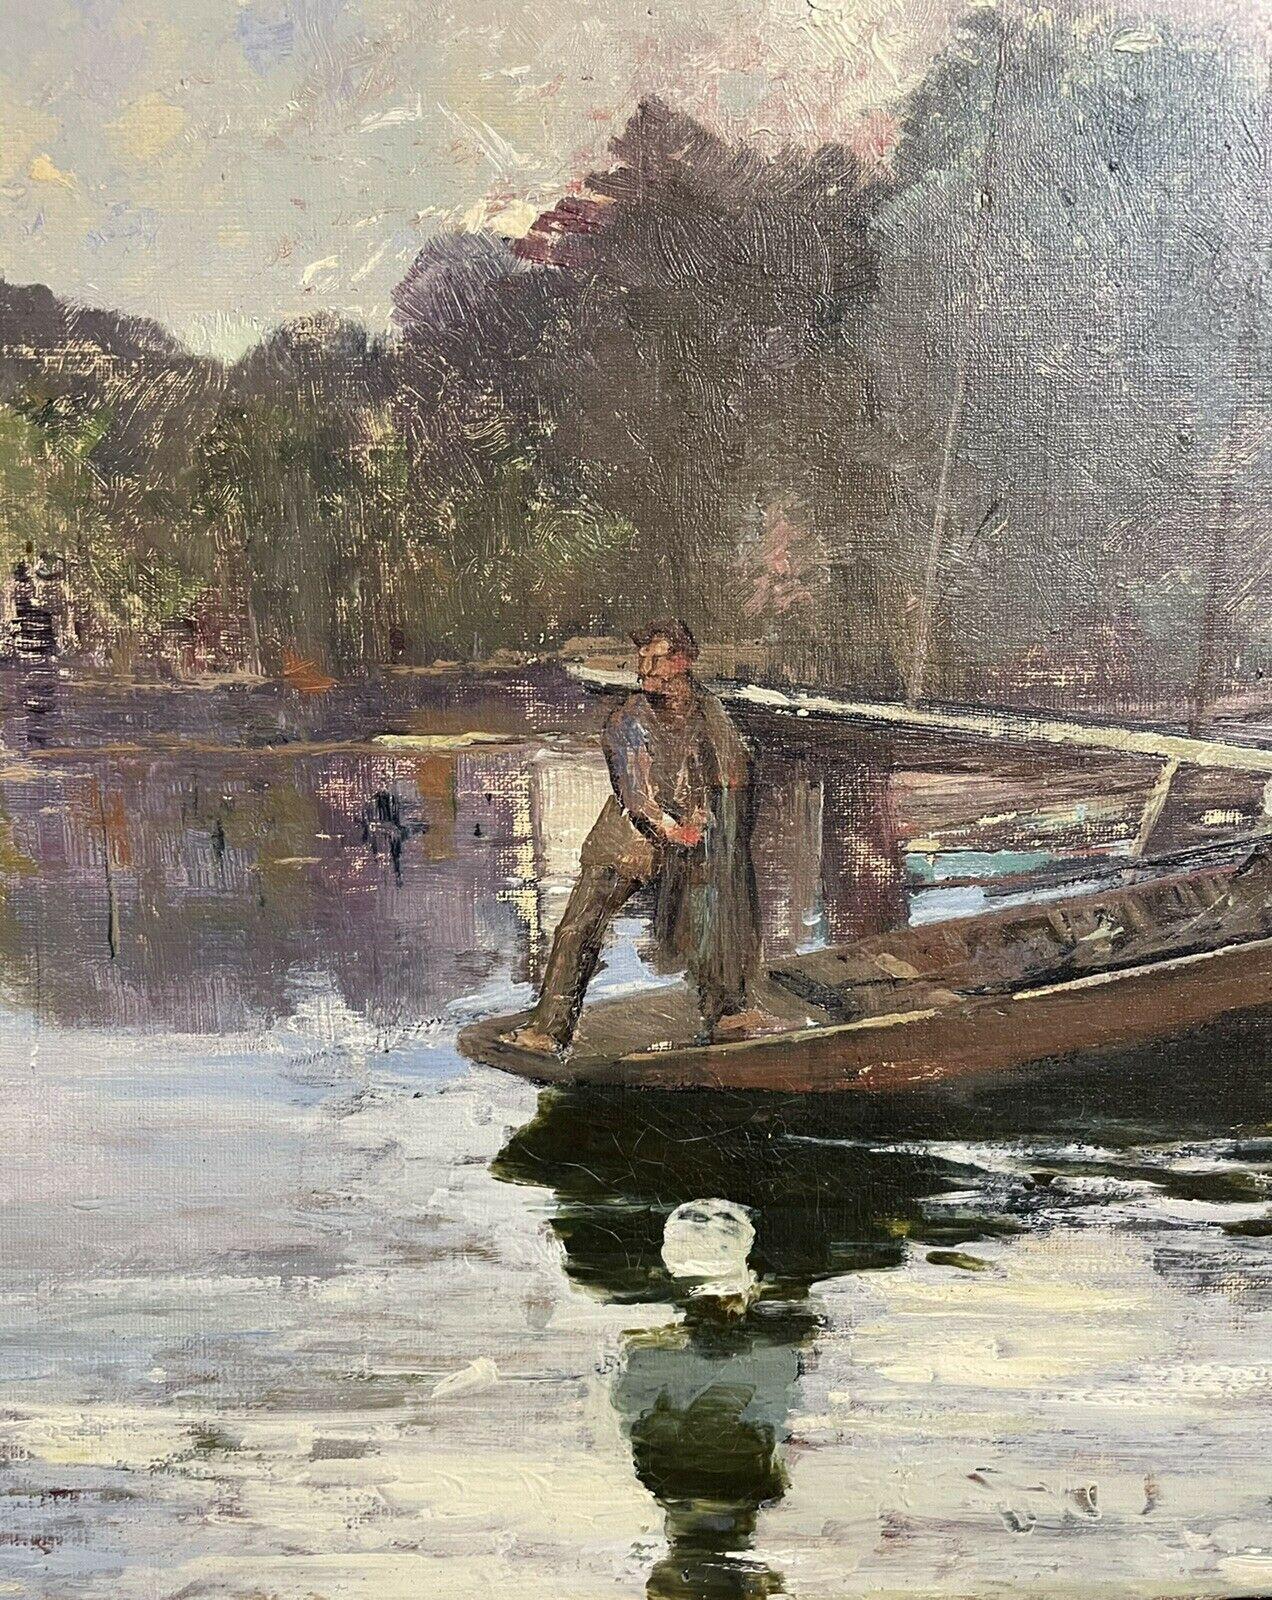 Artist/ School: French School, circa 1930's, indistinctly signed to the lower corner. 

Title: River Landscape with Fishermen from wooden punt. 

Medium: oil painting, on canvas. 

Size: painting: 17 x 21.5 inches
         
Provenance: private